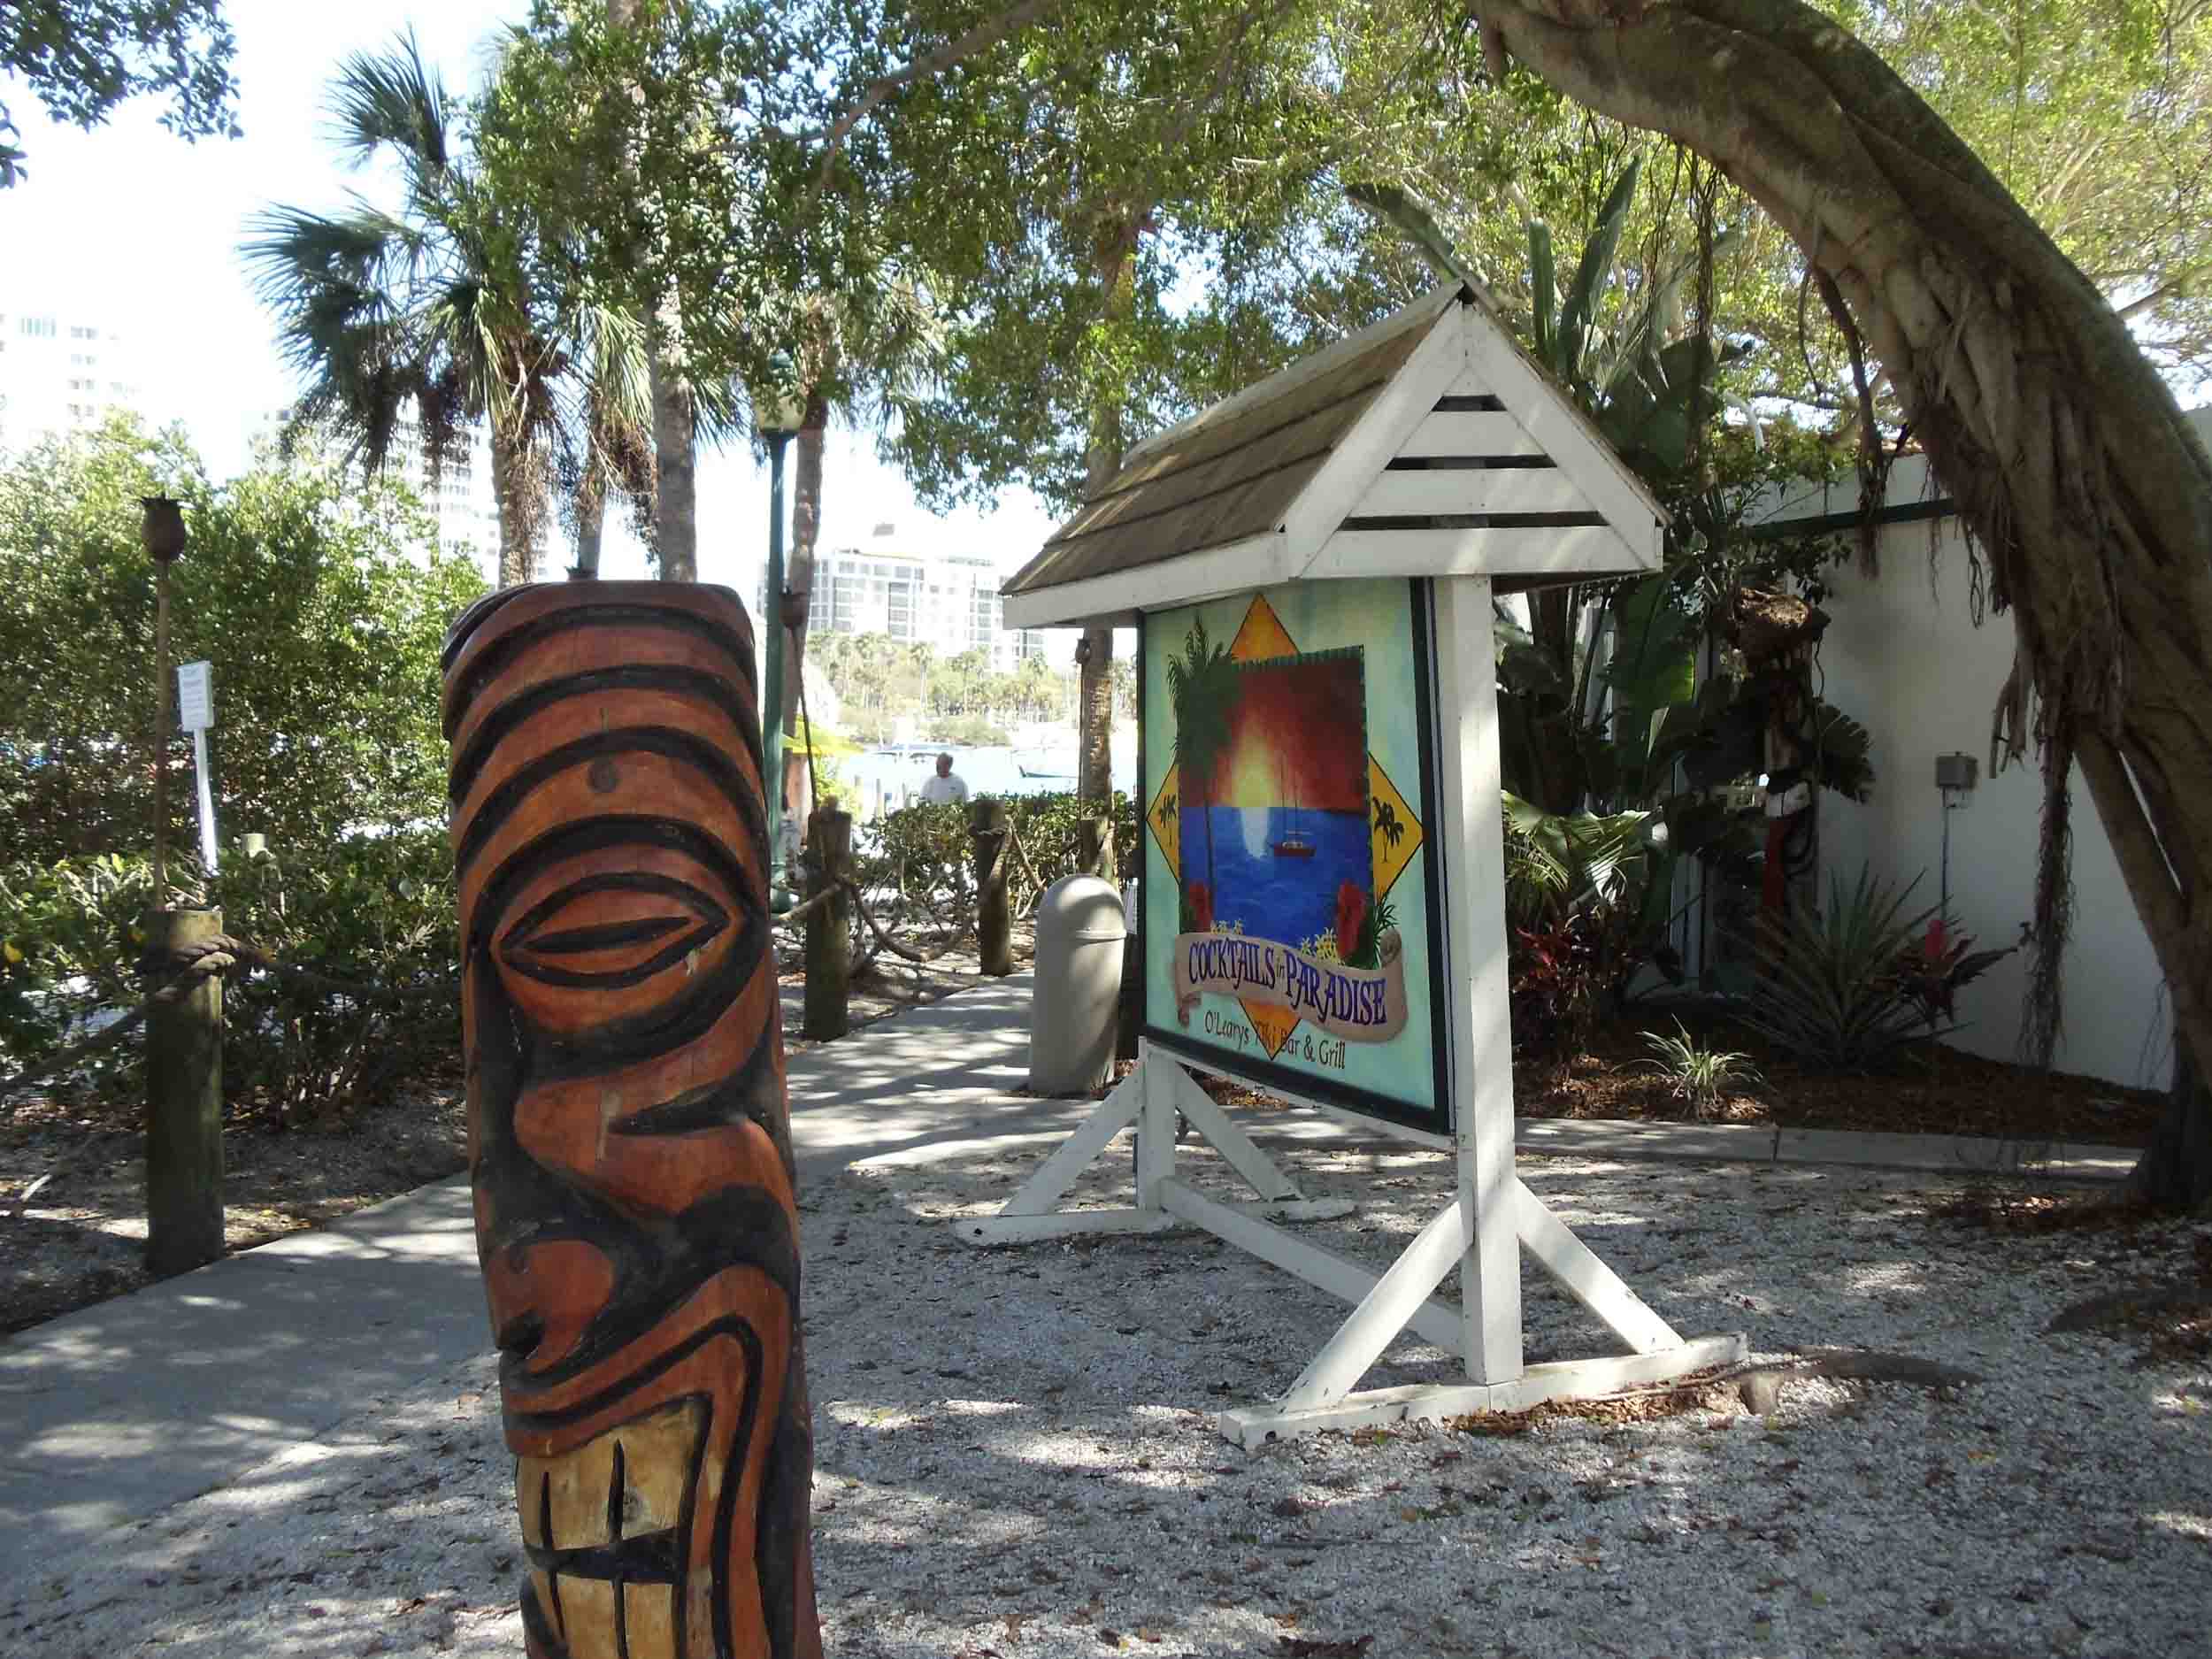 Oleary's Tiki Bar and Grill Entrance